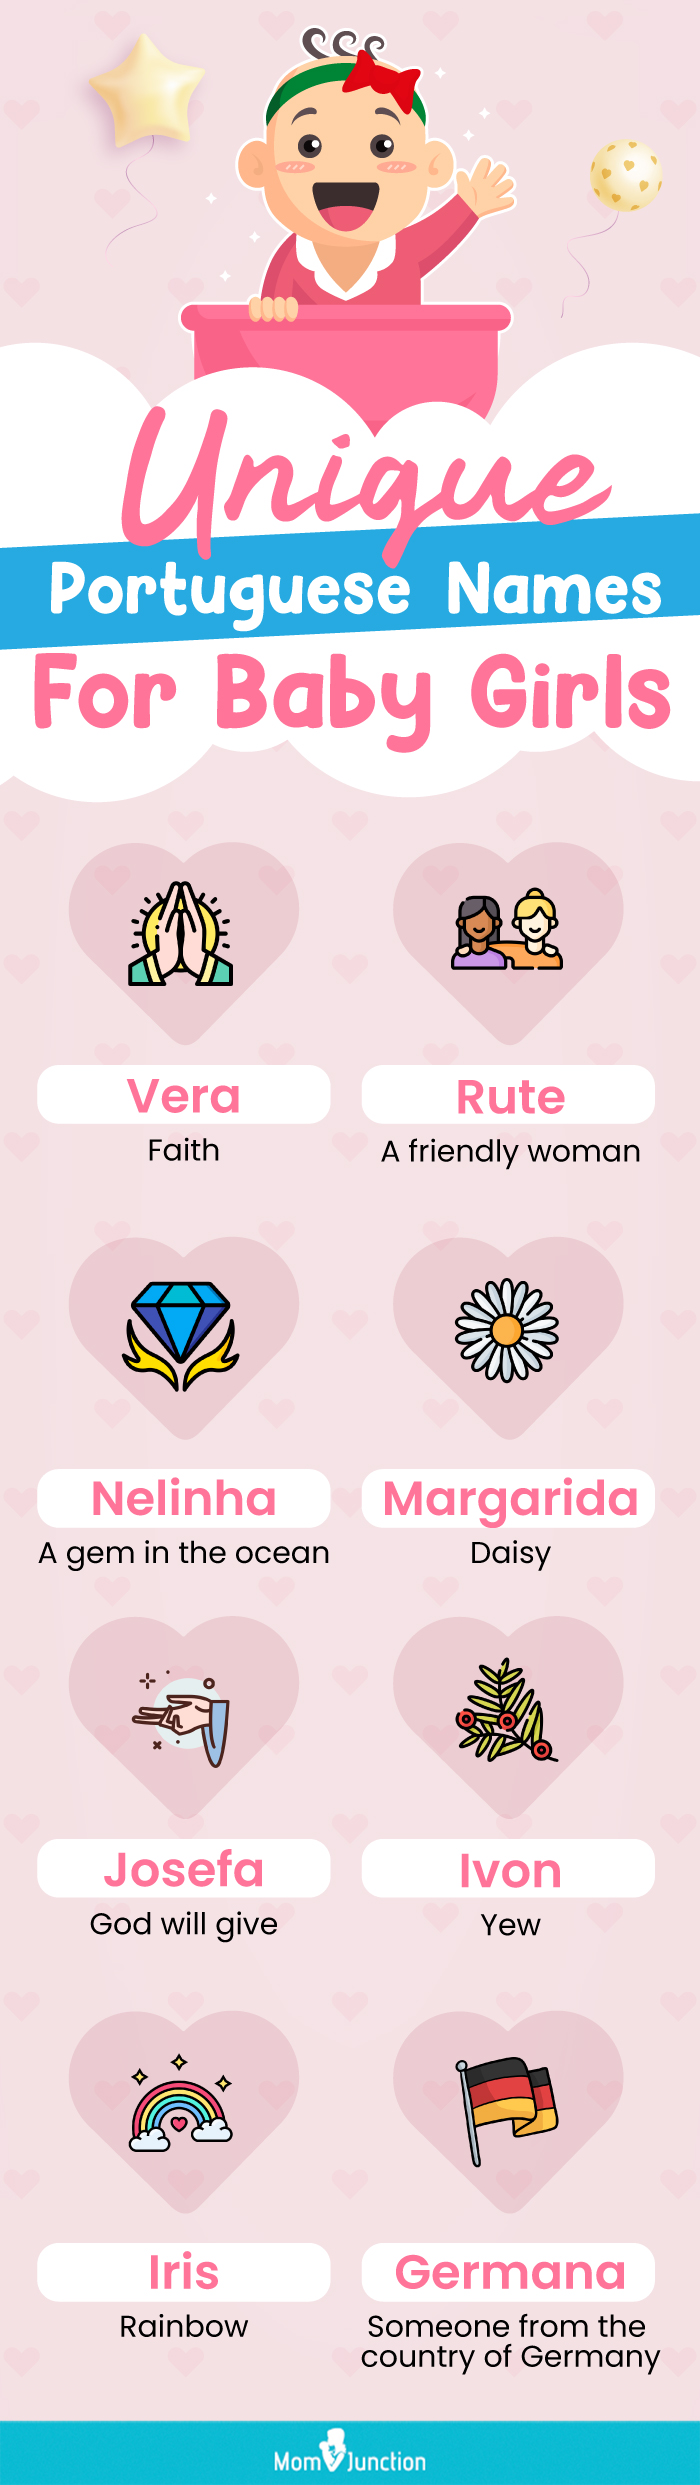 unique portuguese names for baby girls (infographic)